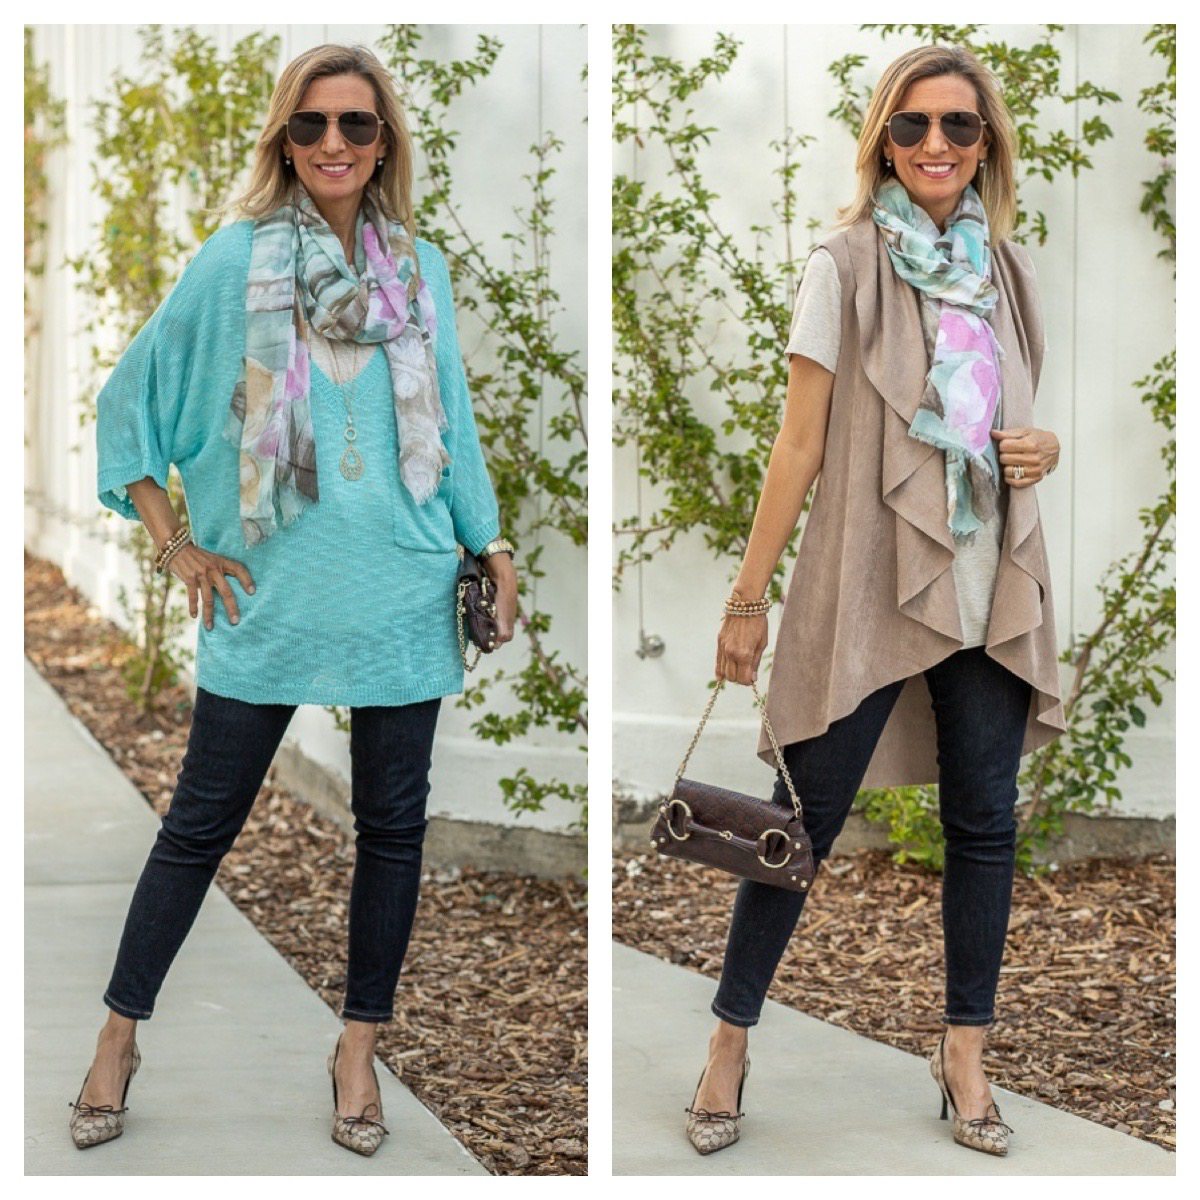 Women's turquoise sweater with scarf styled for spring and summer